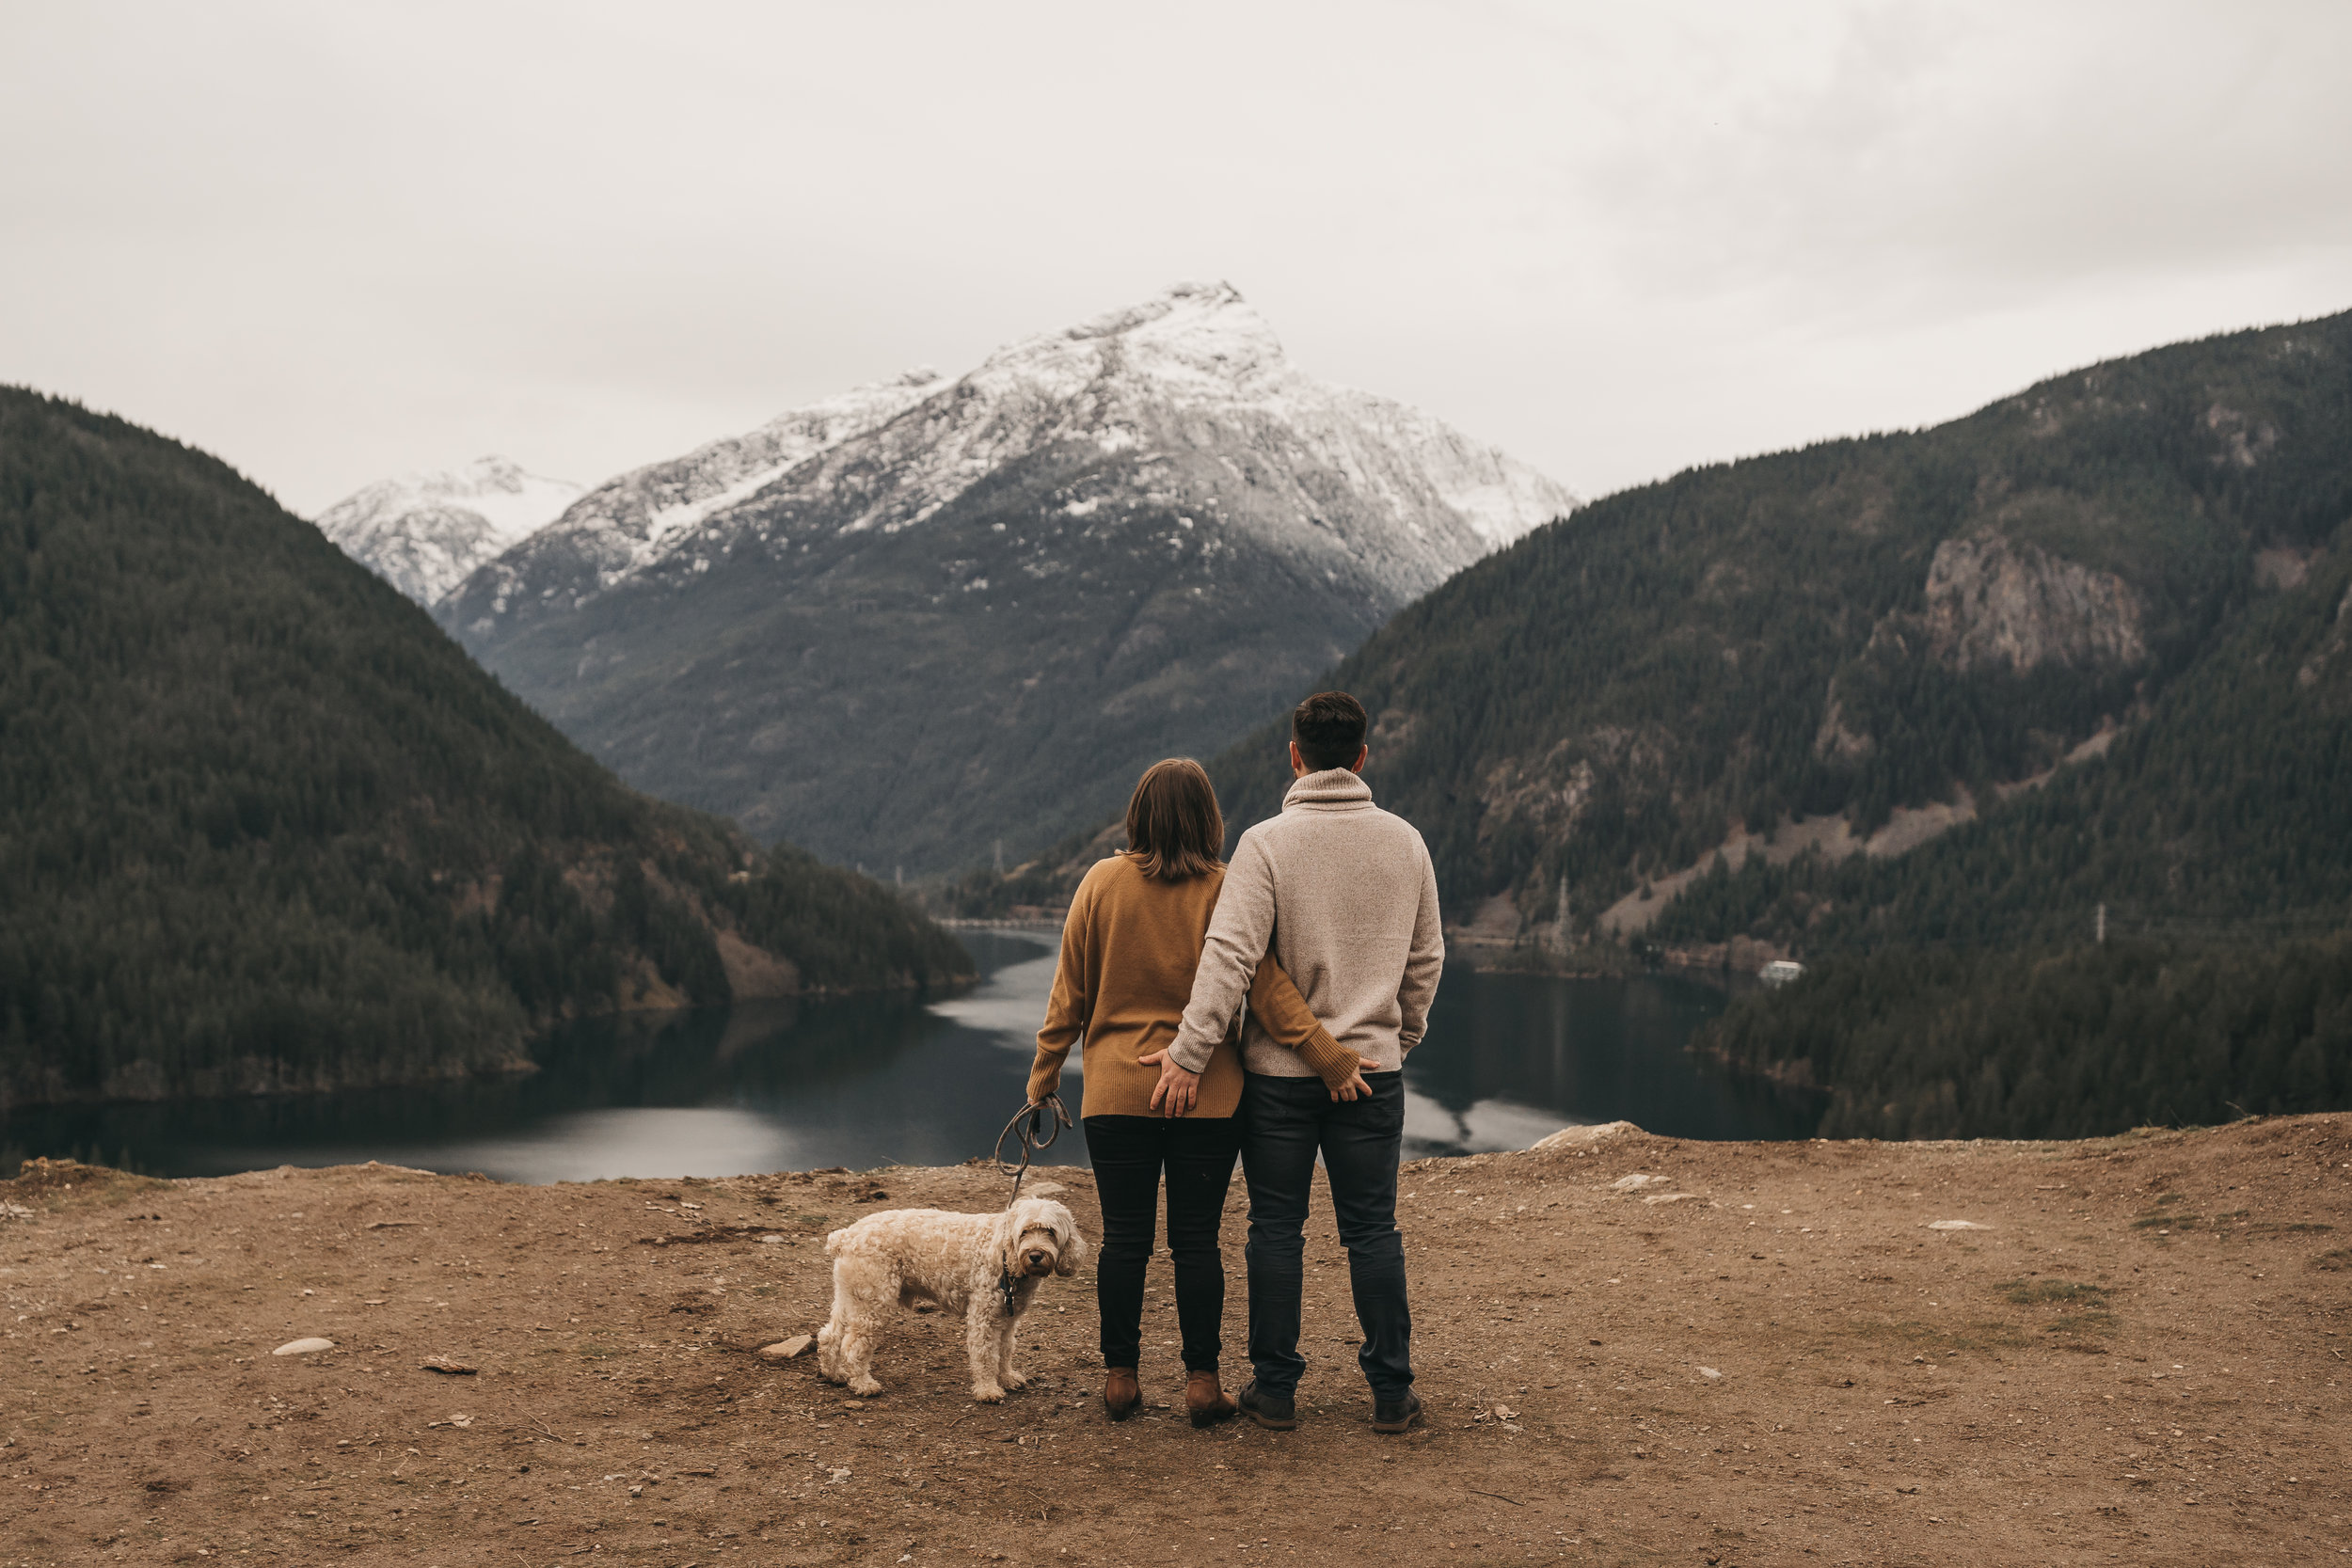 Diablo Lake Engagement Session- North Cascades National Park. Between the Pine- Seattle, WA. Wedding and Elopement Photographer